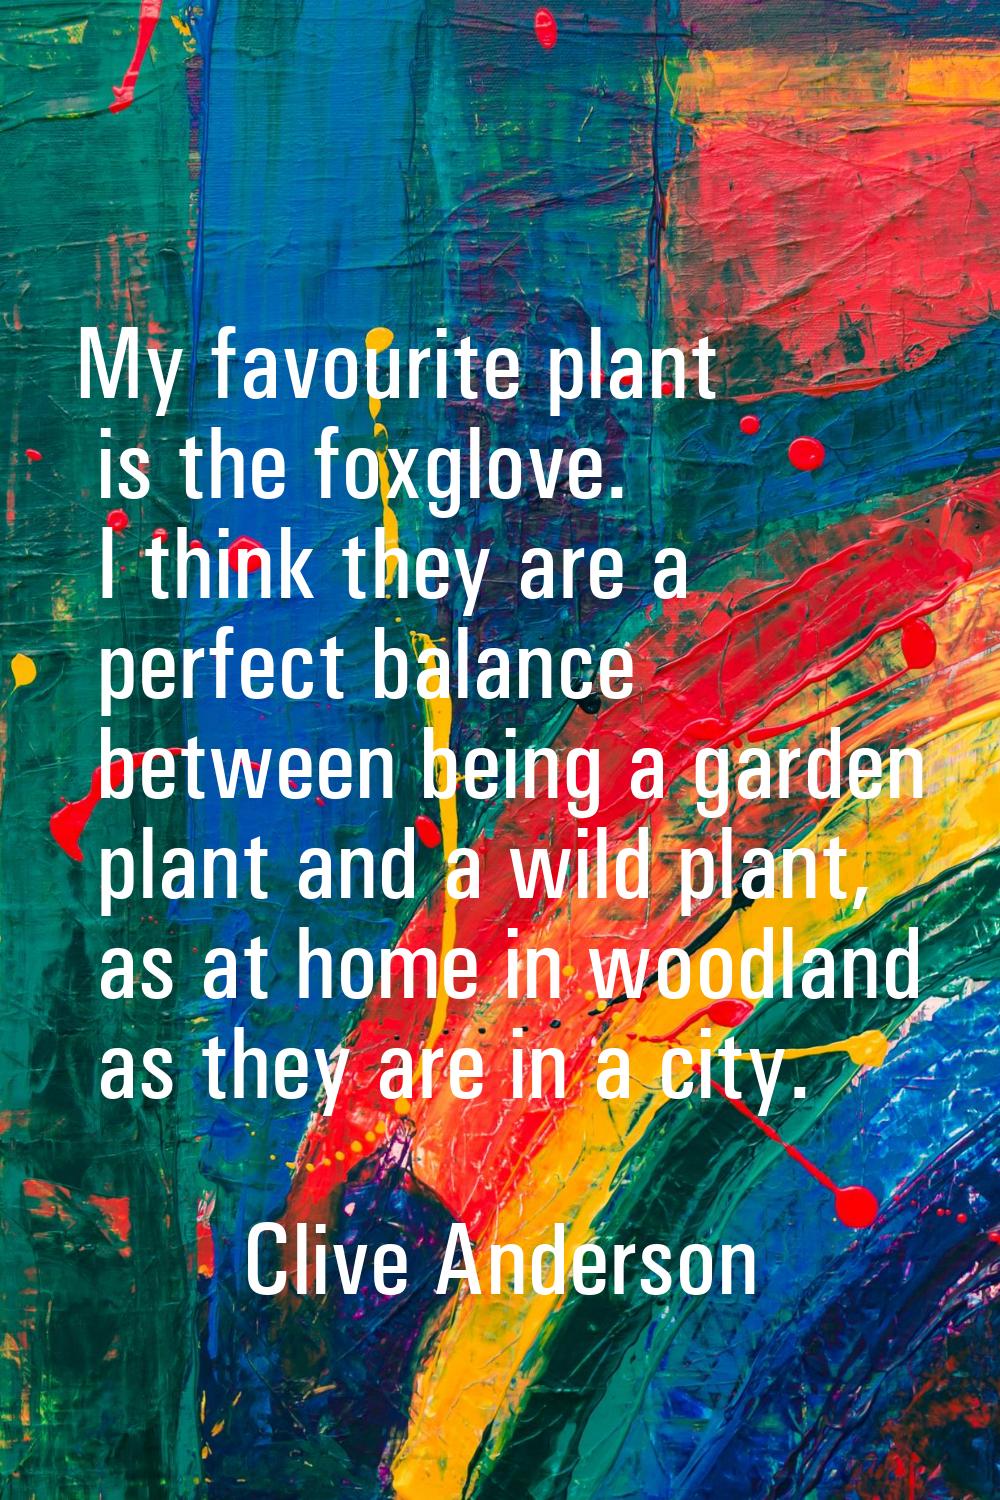 My favourite plant is the foxglove. I think they are a perfect balance between being a garden plant